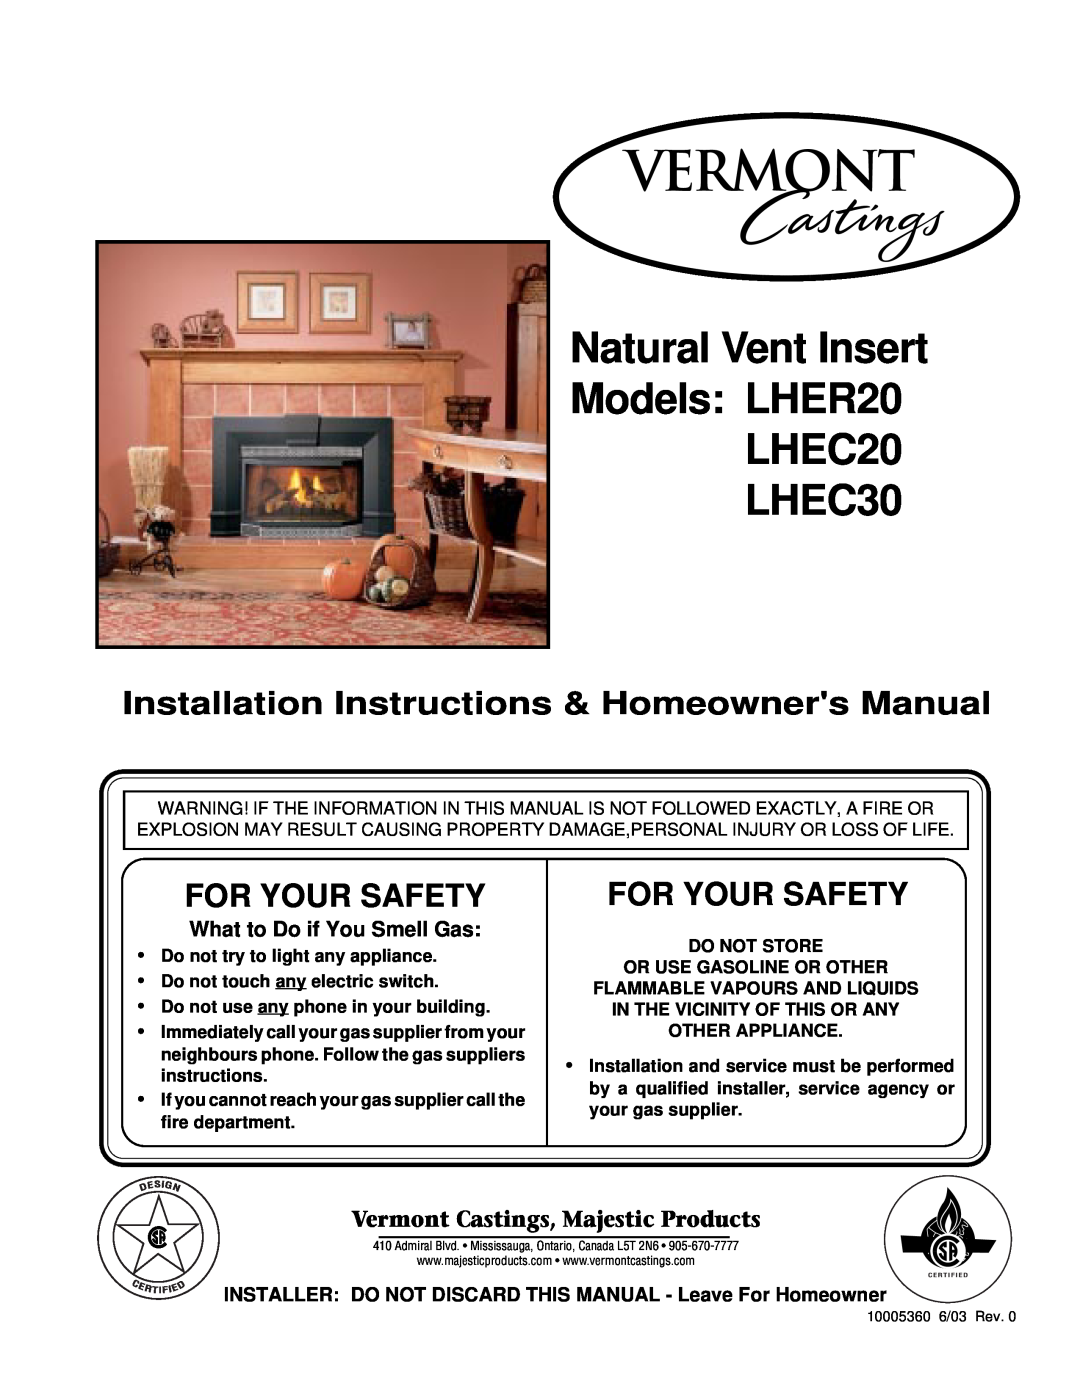 Vermont Casting installation instructions Natural Vent Insert Models LHER20 LHEC20 LHEC30, For Your Safety 